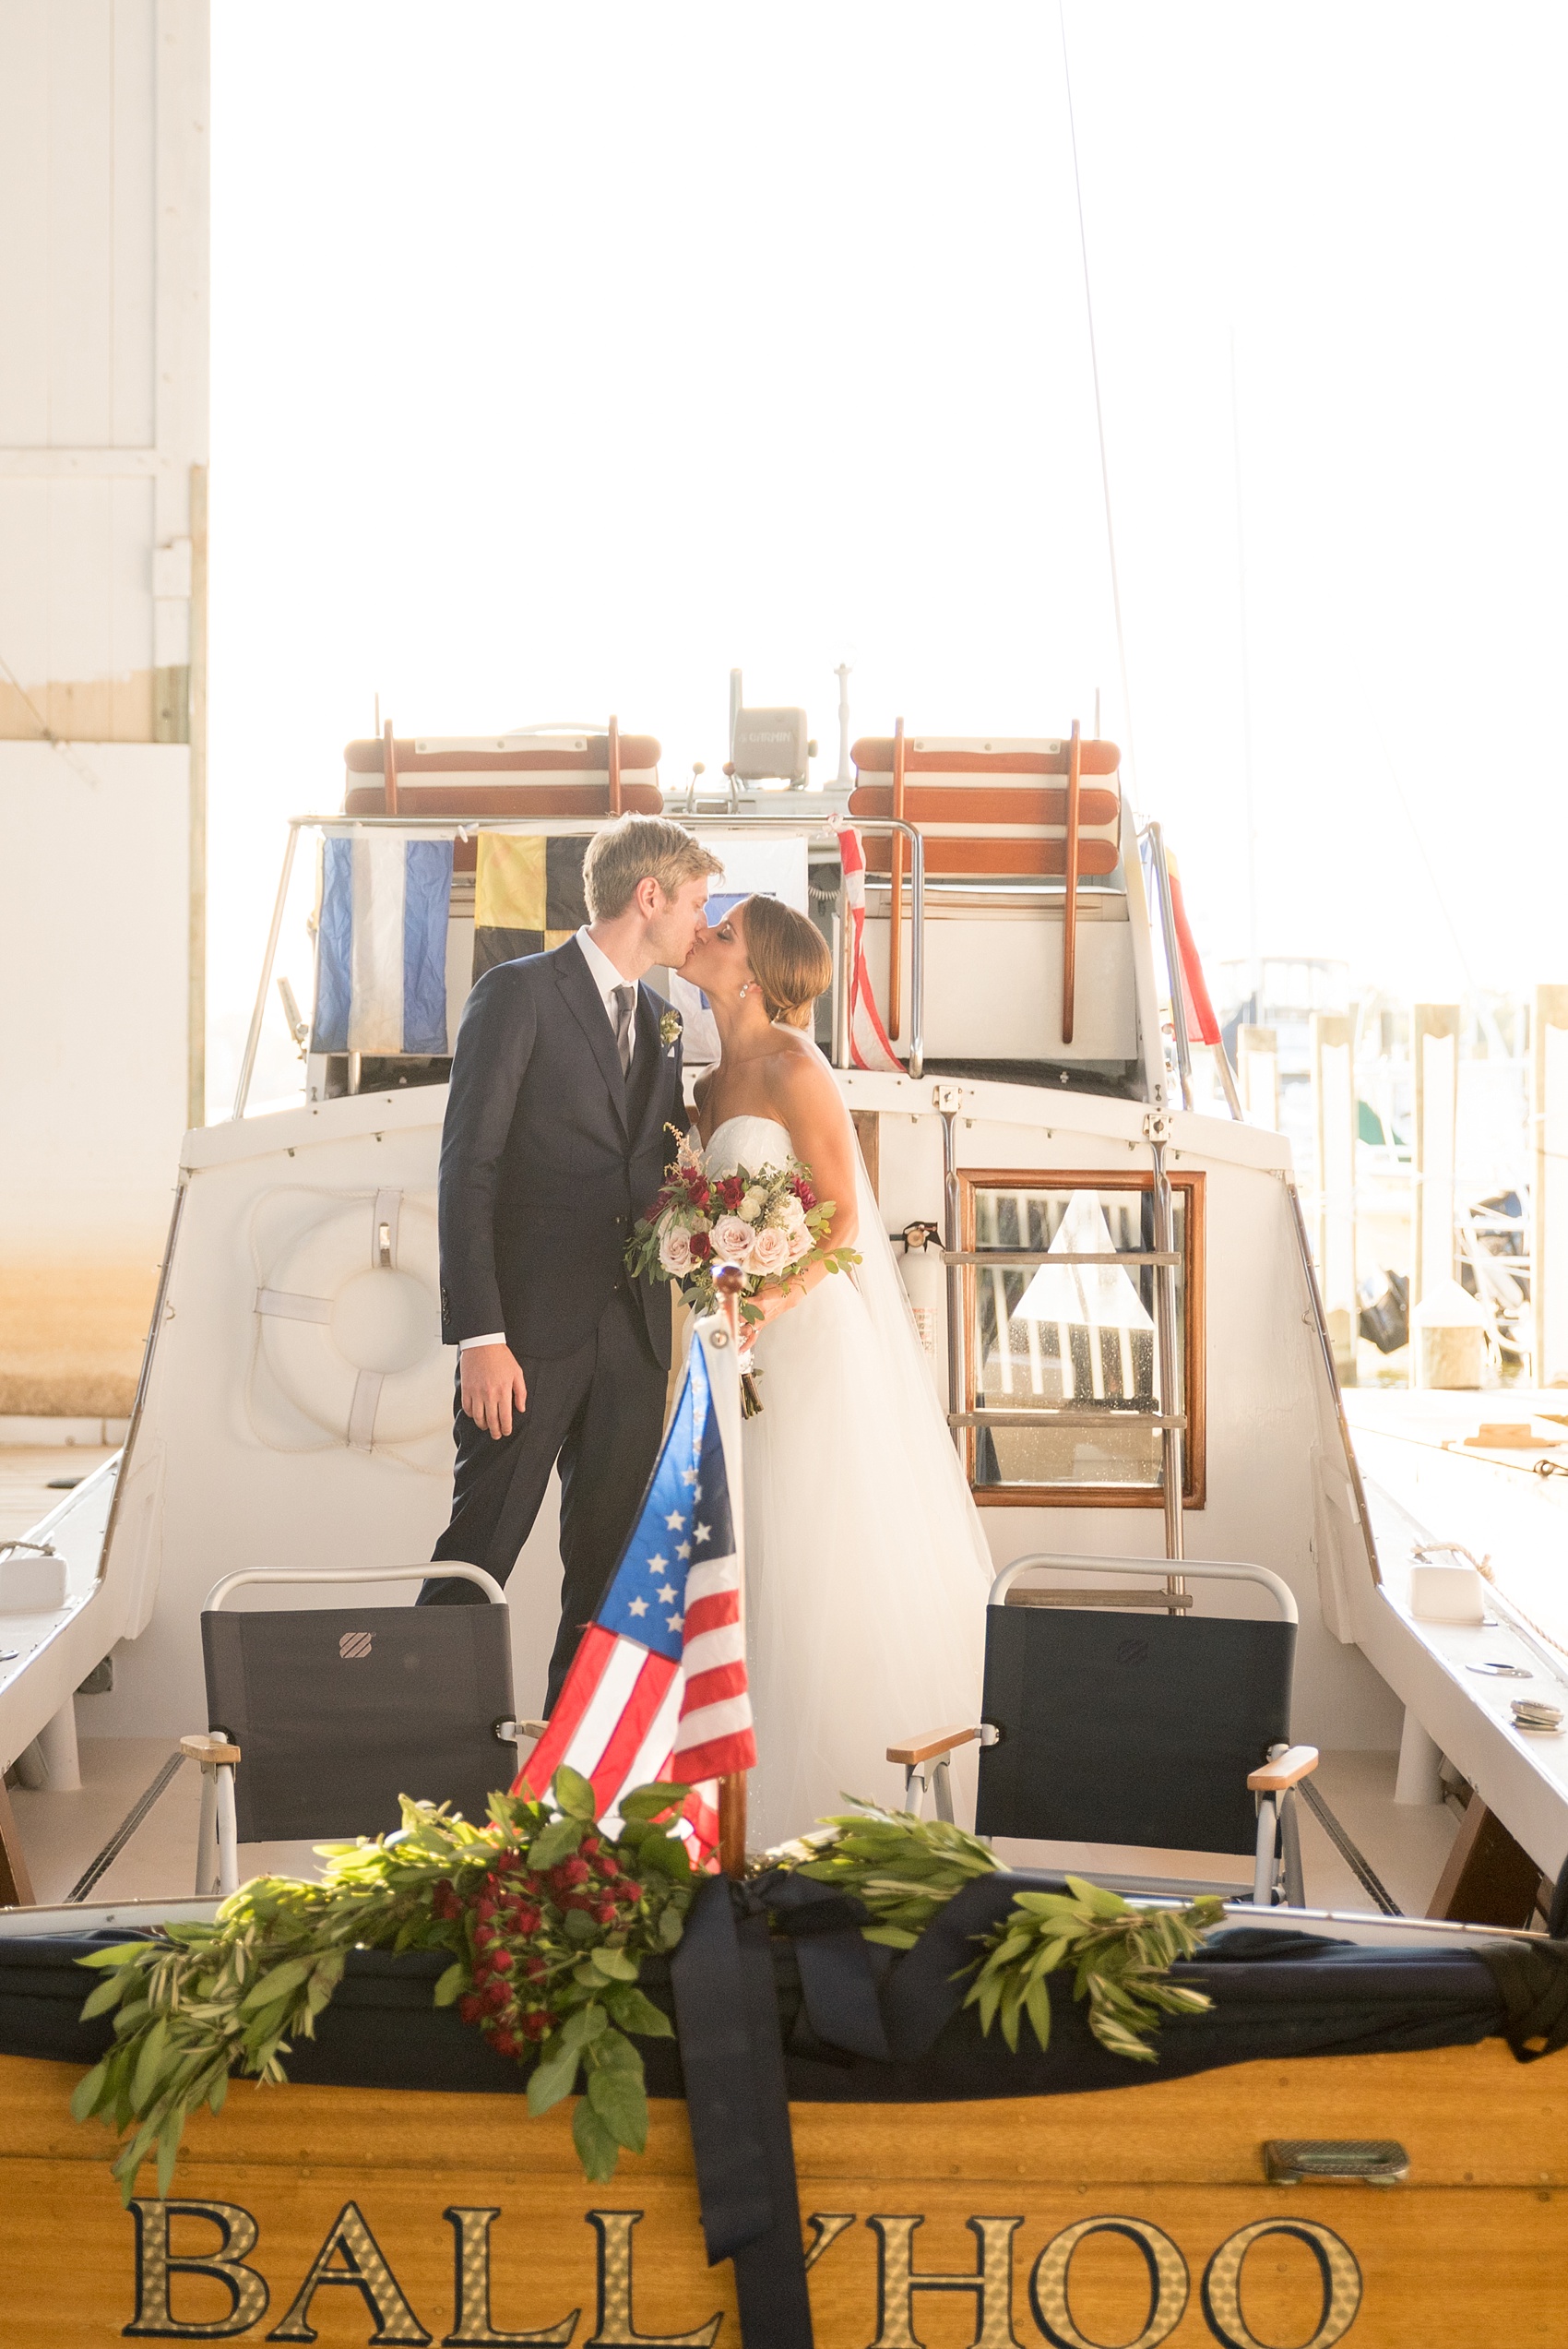 Mikkel Paige Photography picture of a Bay Head Yacht Club nautical wedding. A boathouse ceremony with the bride and groom exiting on a vintage boat.